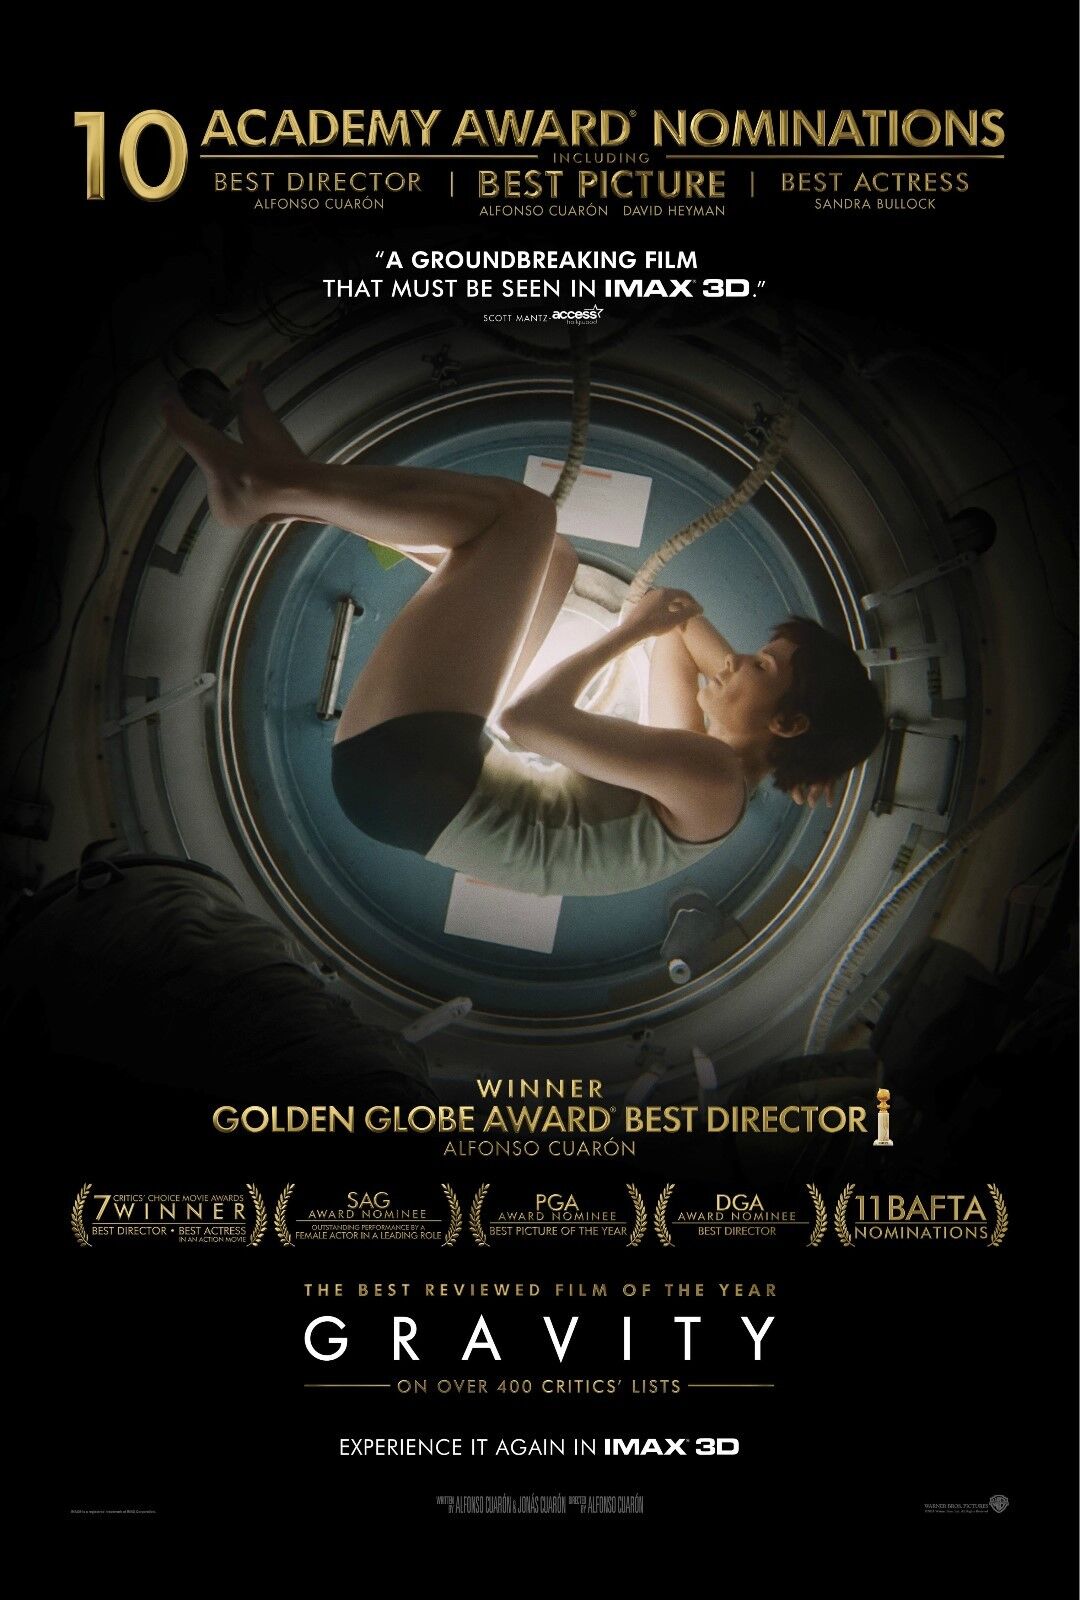 Gravity (2013) ***** in 3D, Seen at the Cinema